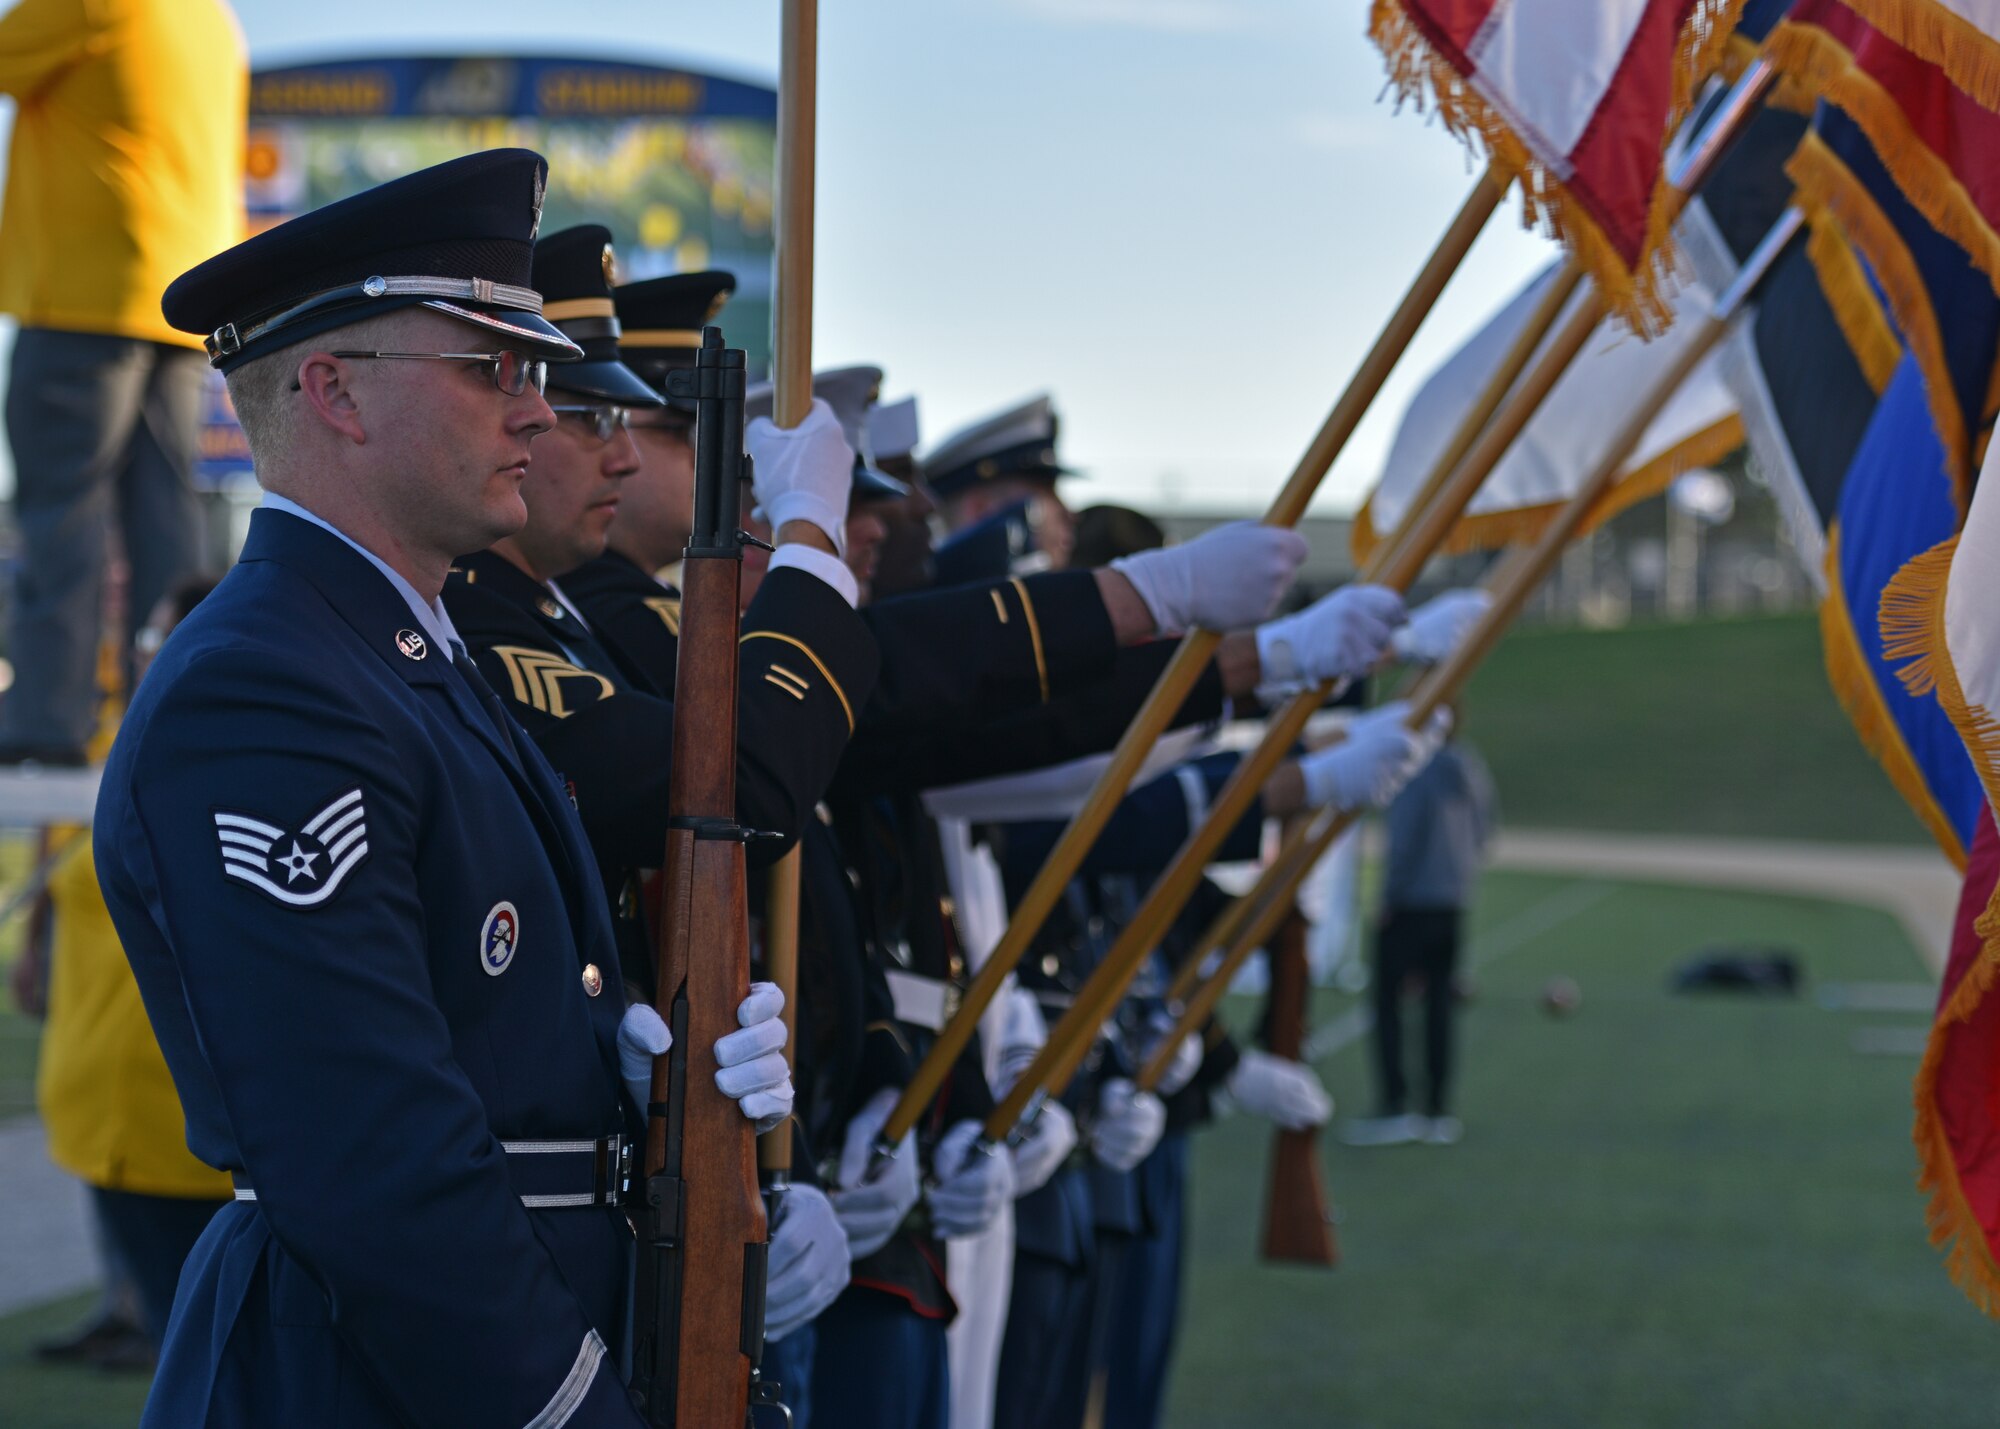 The Goodfellow Joint Service Color Guard presented the colors during the Military Appreciation Night at the 1st Community Credit Union Field, Nov. 6, 2021. The JSCG presented the colors at half-time while members from the delayed entry program sworn into the U.S. Armed Forces. (U.S. Air Force photo by Senior Airman Ashley Thrash)